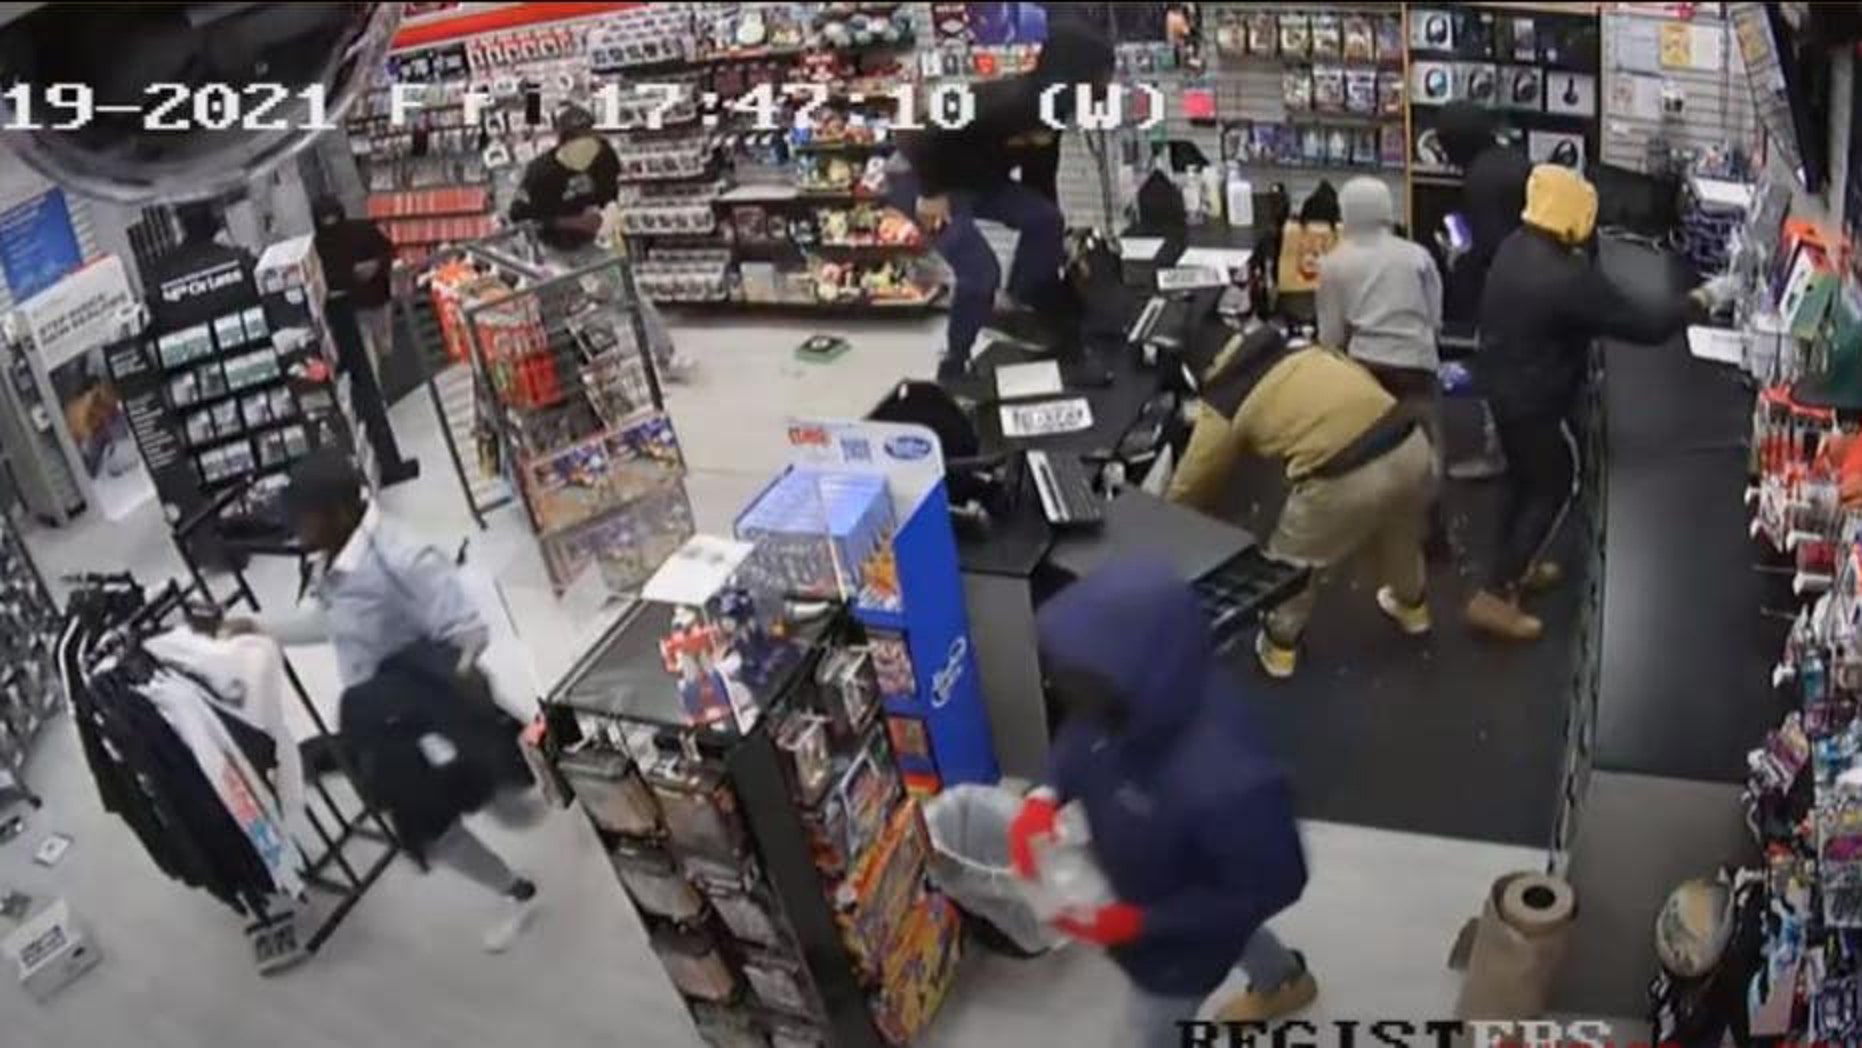 Suspects are seen looting a store in Chicago